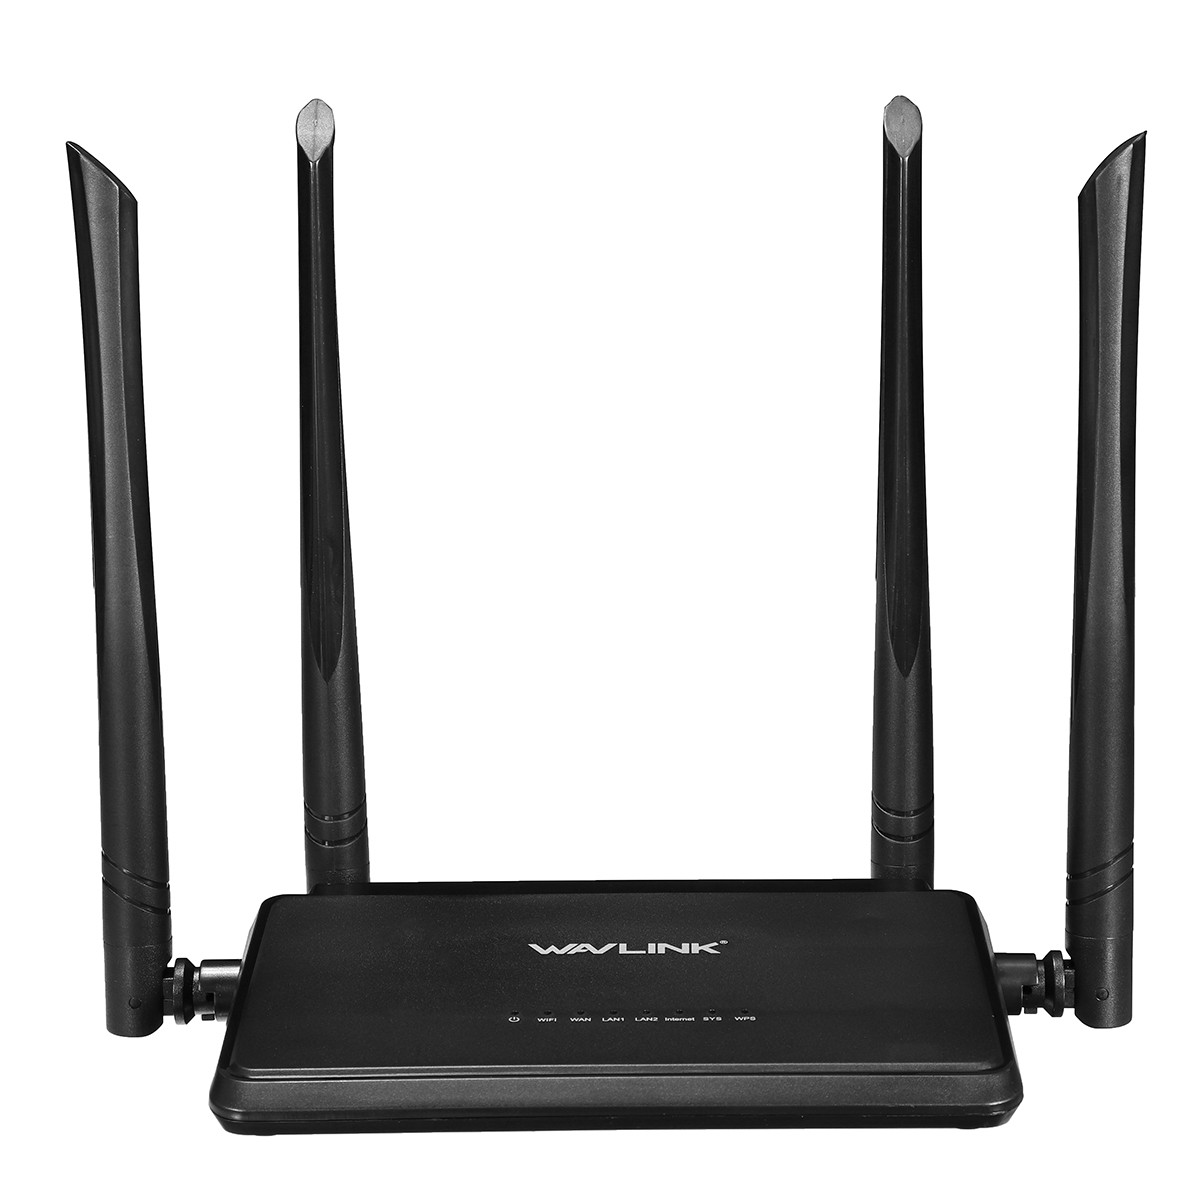 

Wavlink WN529N2A Wireless Wifi Signal 300Mbps 2.4G Router 802.11 b/g/n 4 External Antennas Repeater